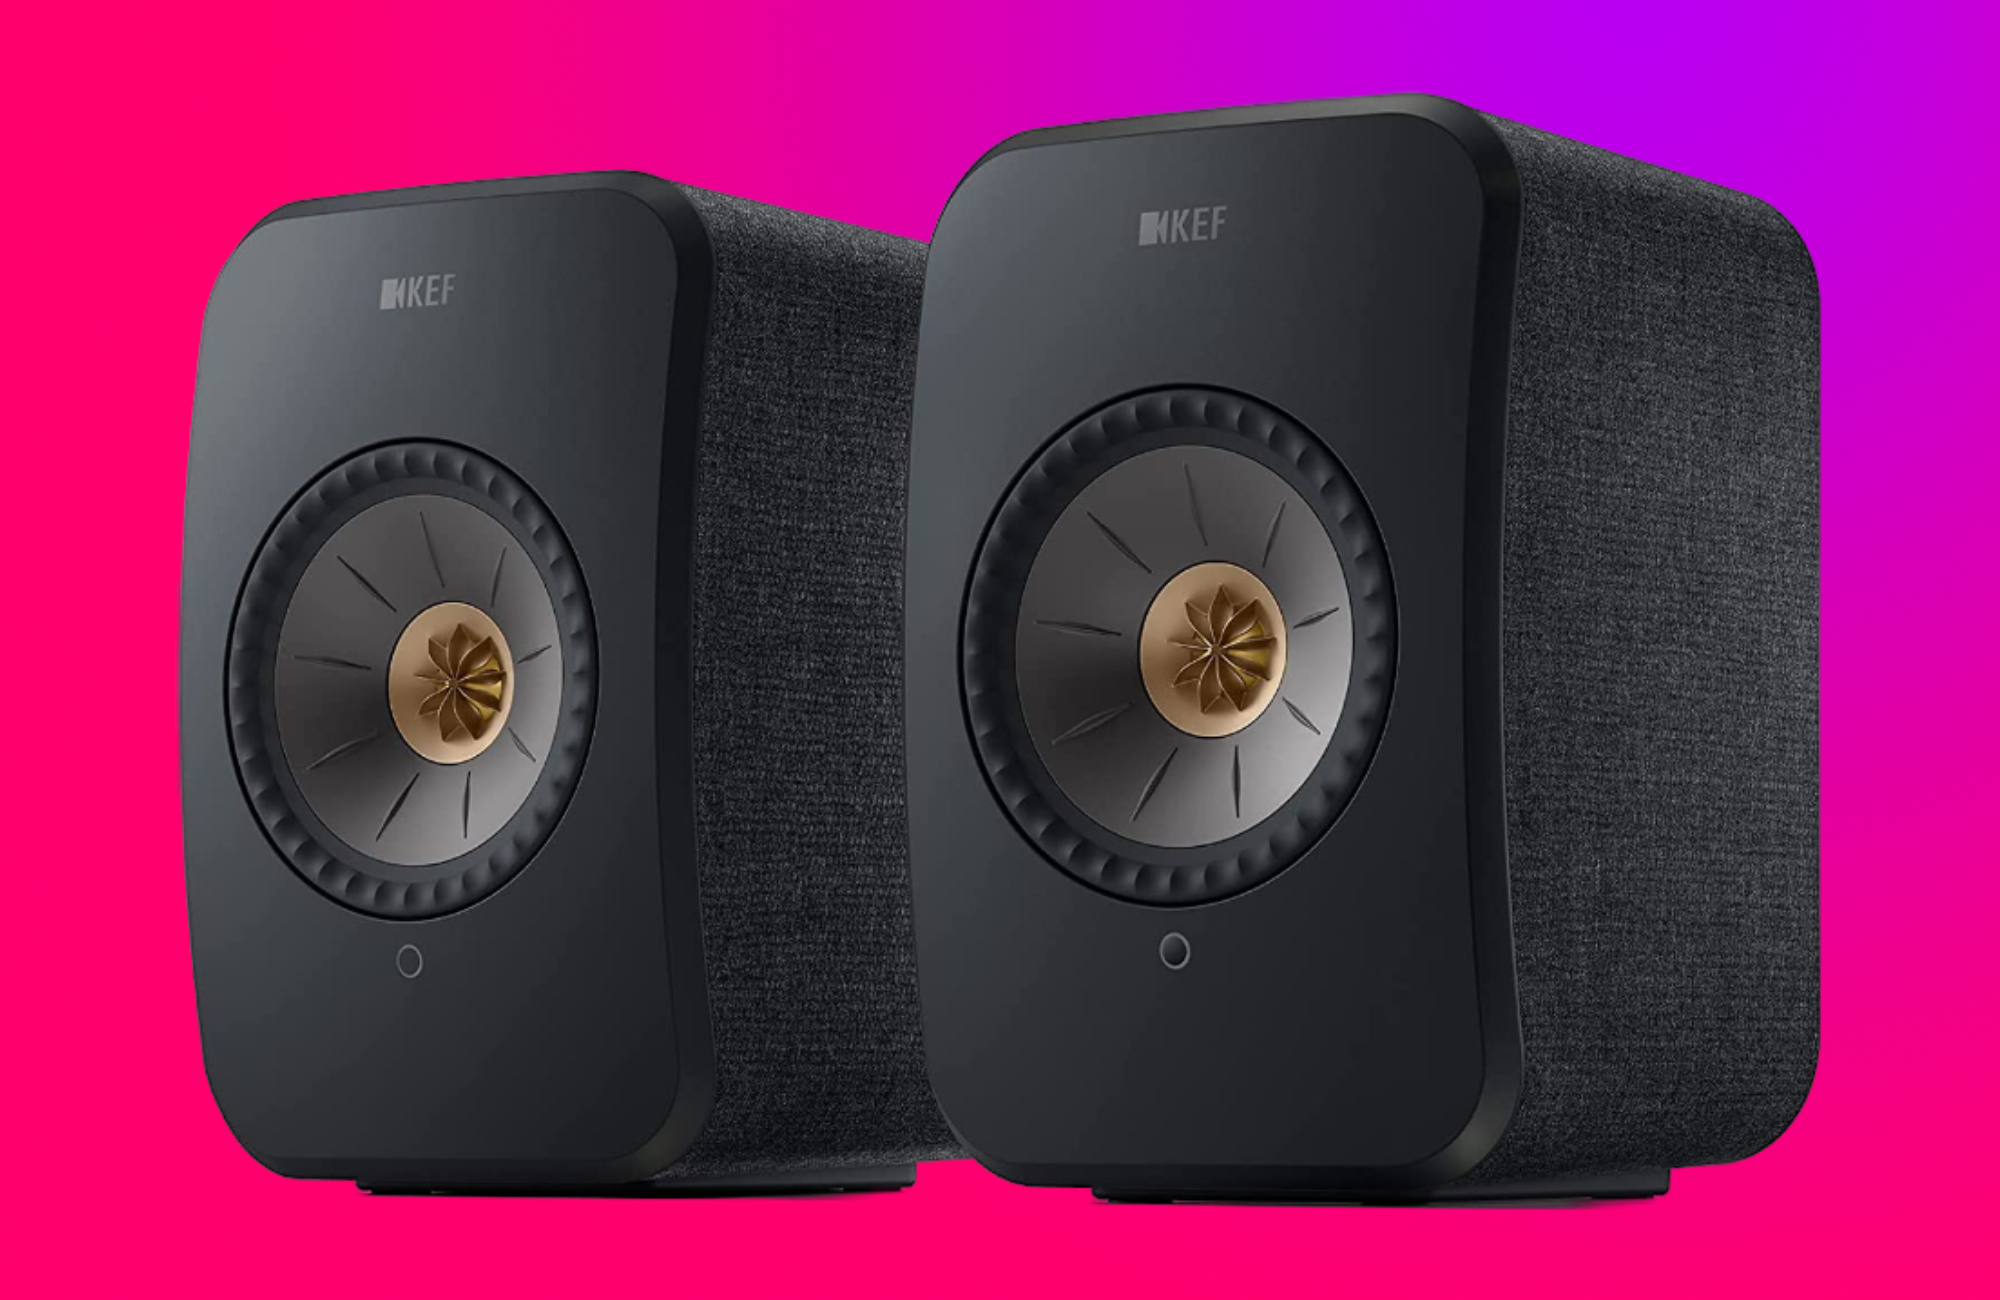 Get KEF speakers at the lowest price ever with this Prime Day deal